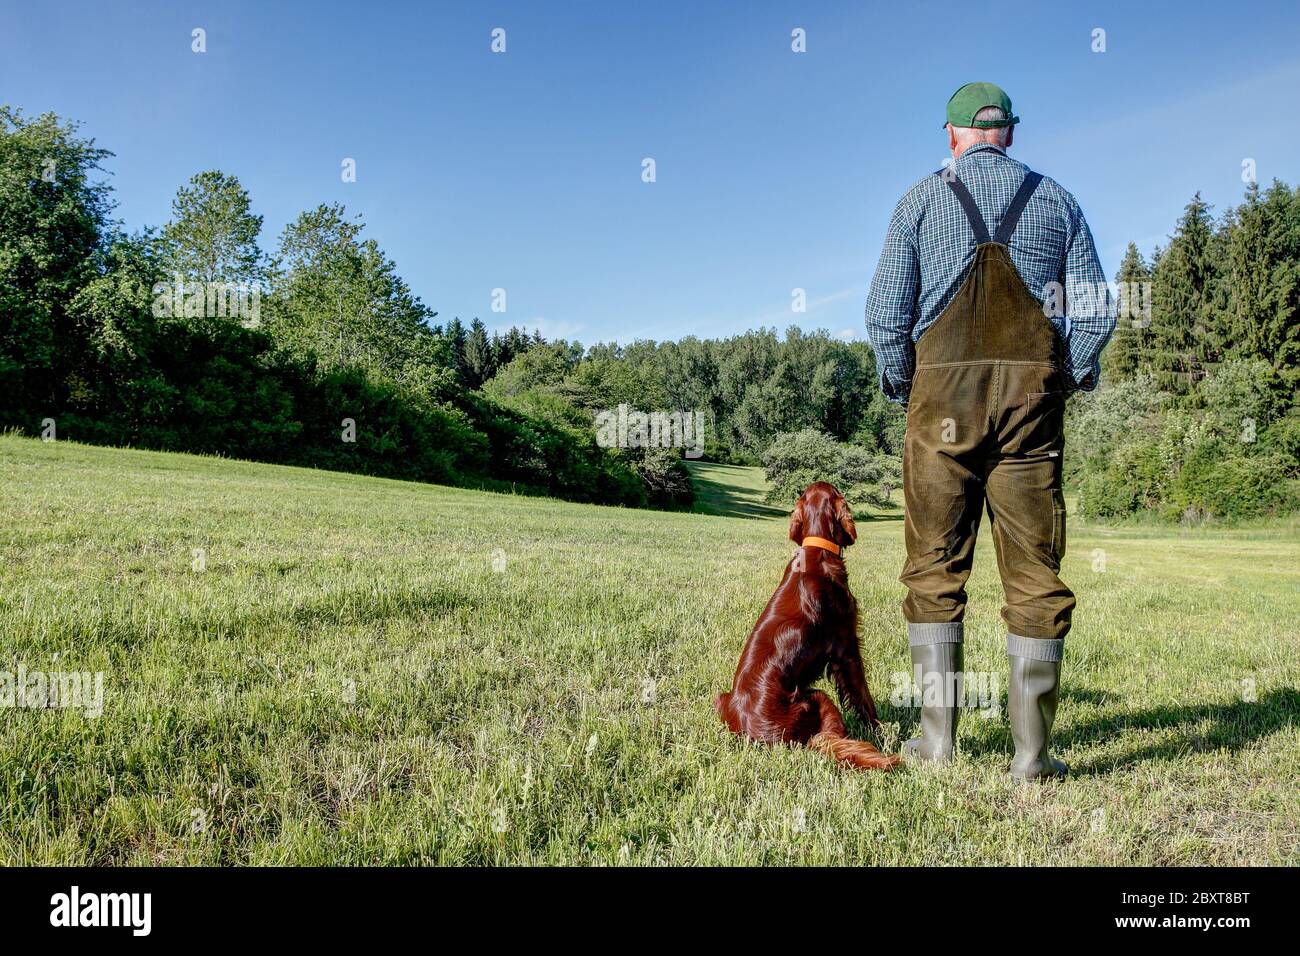 On a sunny day in May, a Farmer stands with his Irish Setter hunting dog on the mowed meadow and both look down into the little valley. Stock Photo